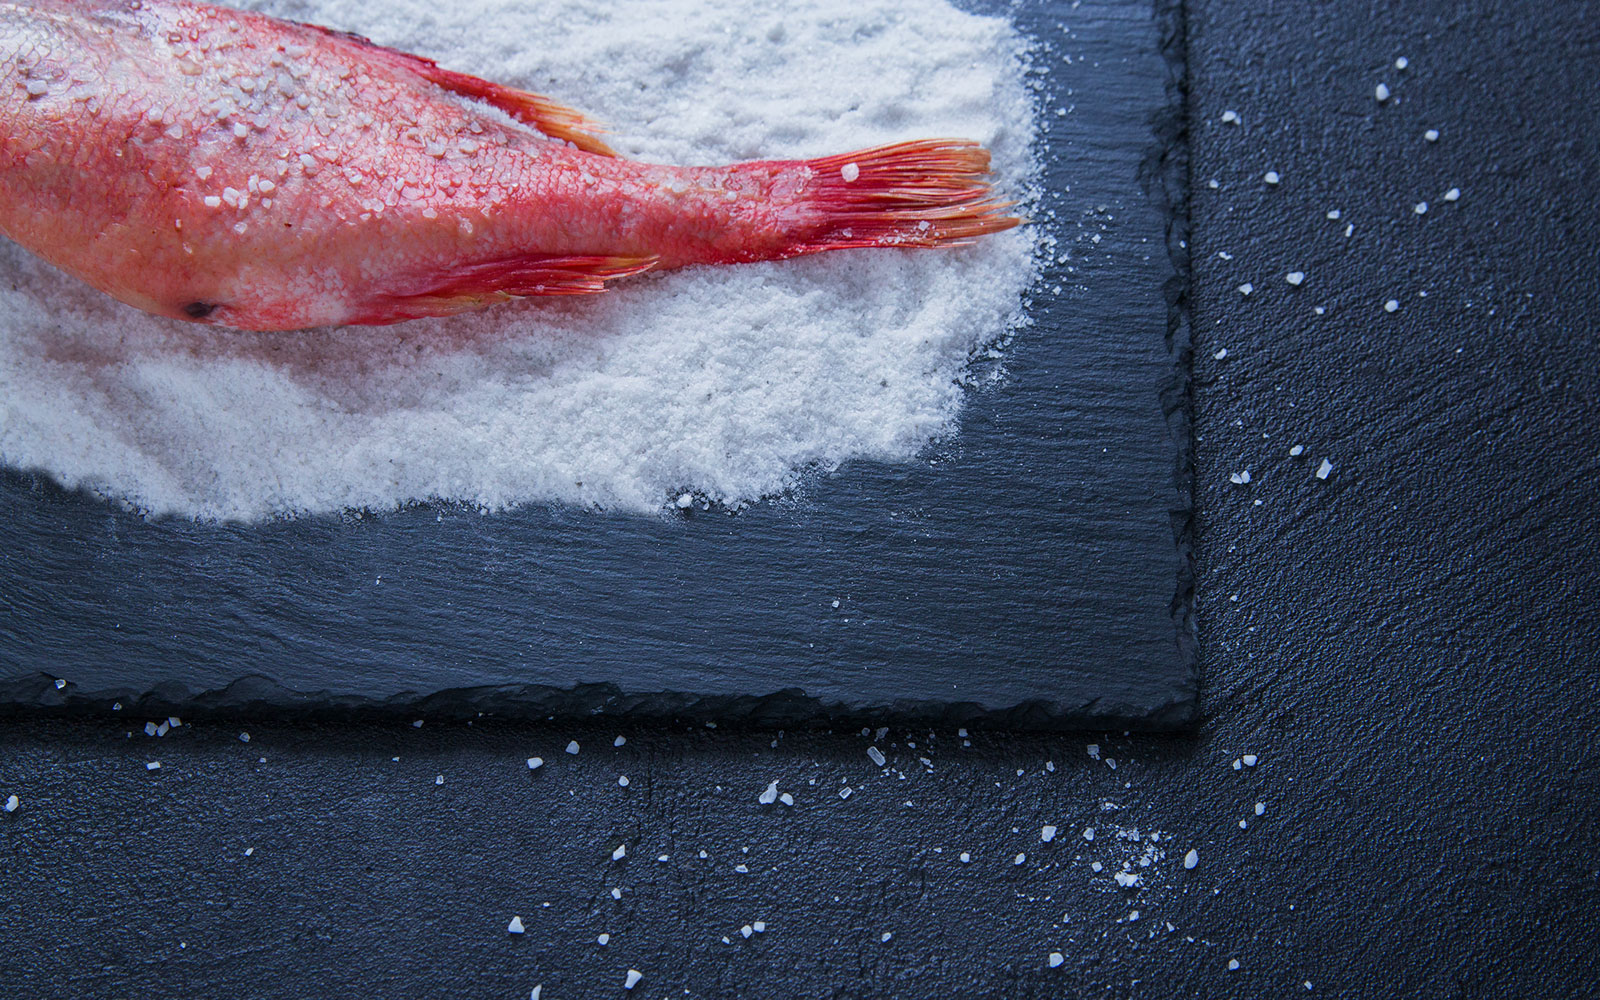 Crusted fish: how many ways can you cook it?